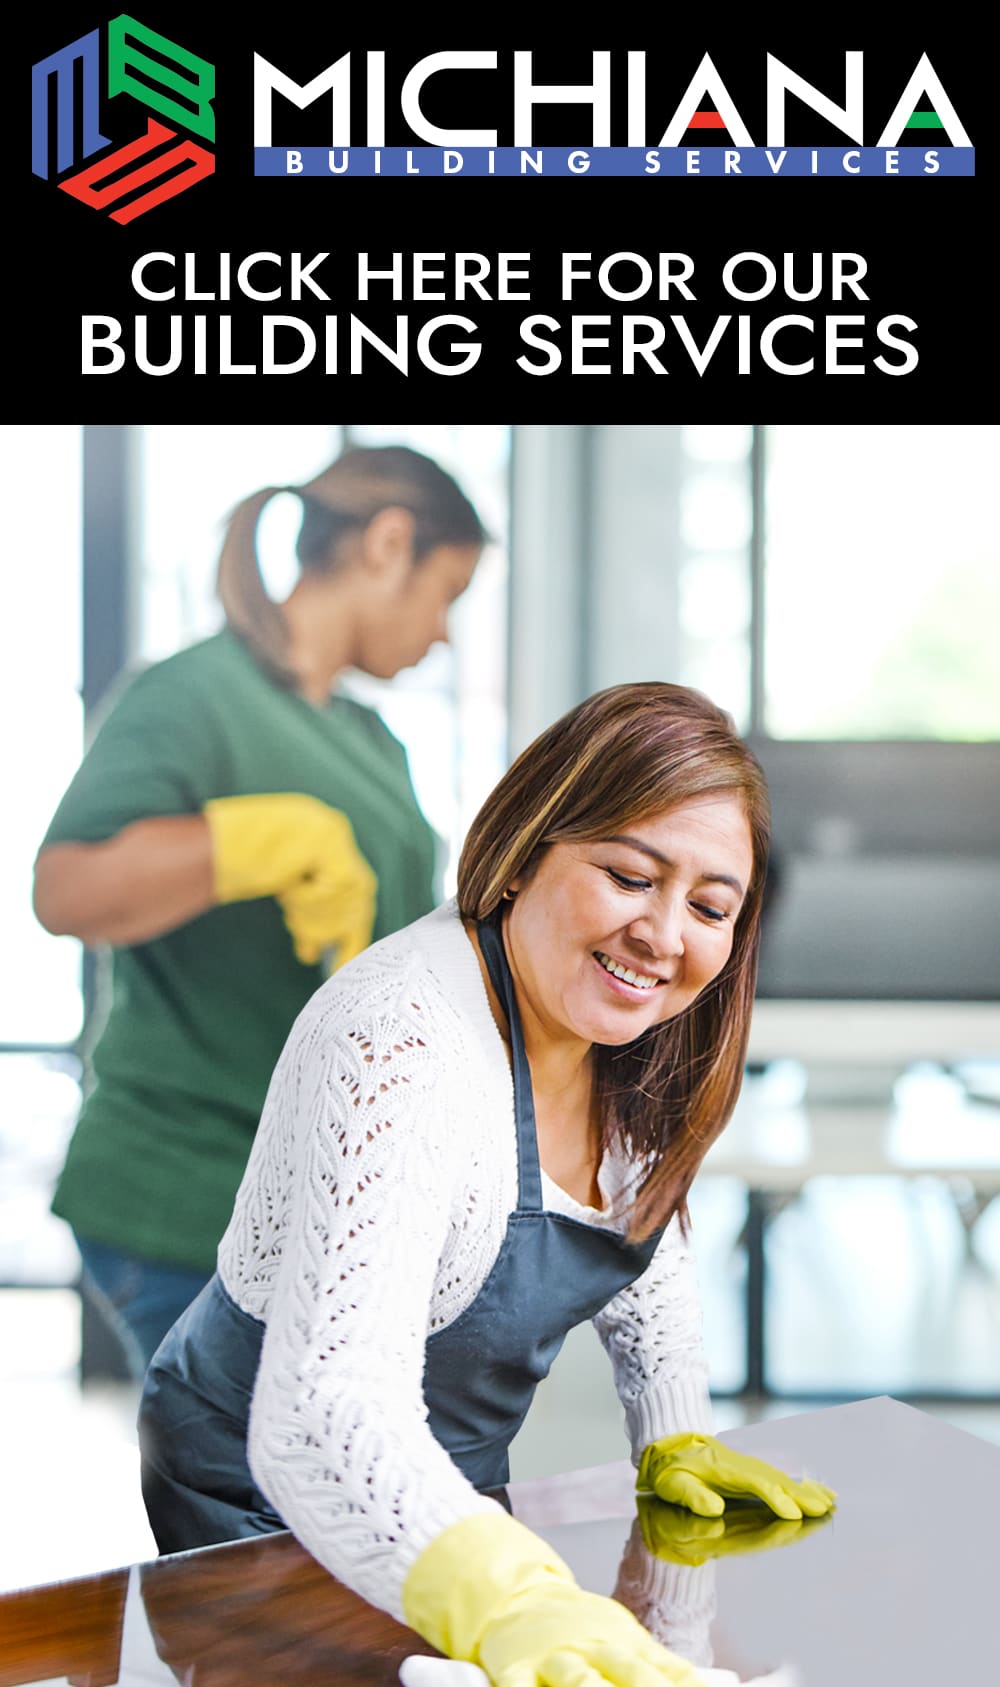 Michiana-Building-Services-Landing-Page-JANITORIAL-NEW-NEW-NEWEST.jpg